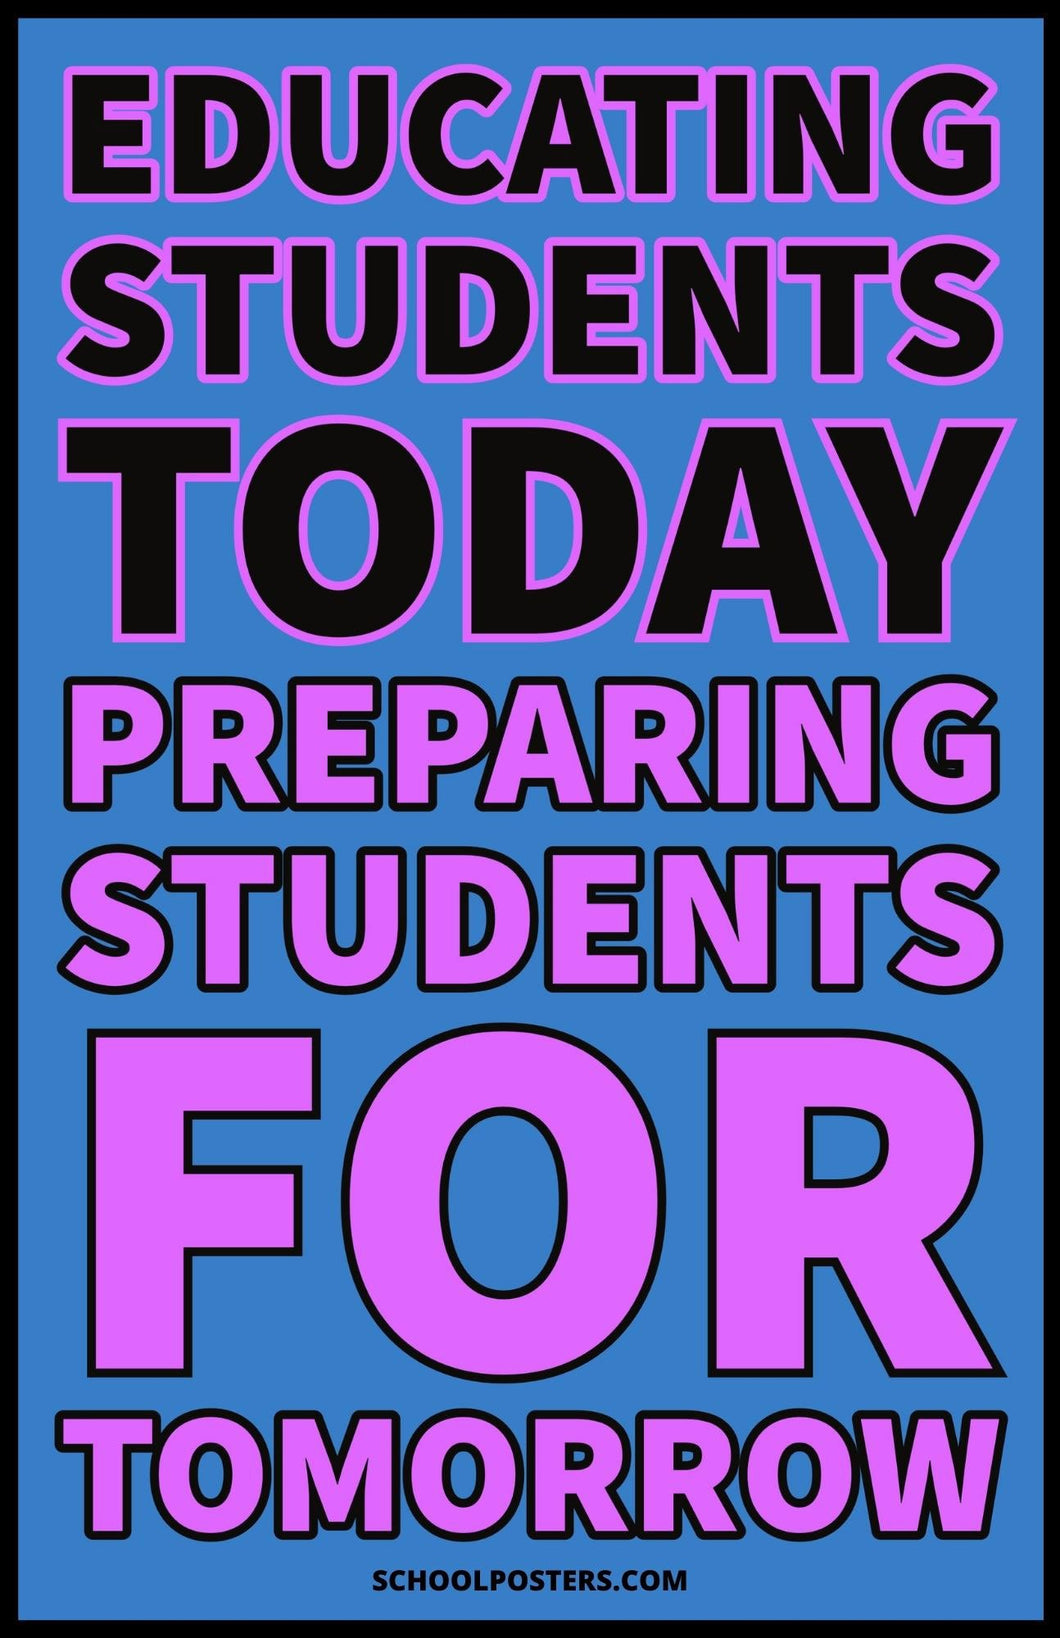 Educating Students Today Poster